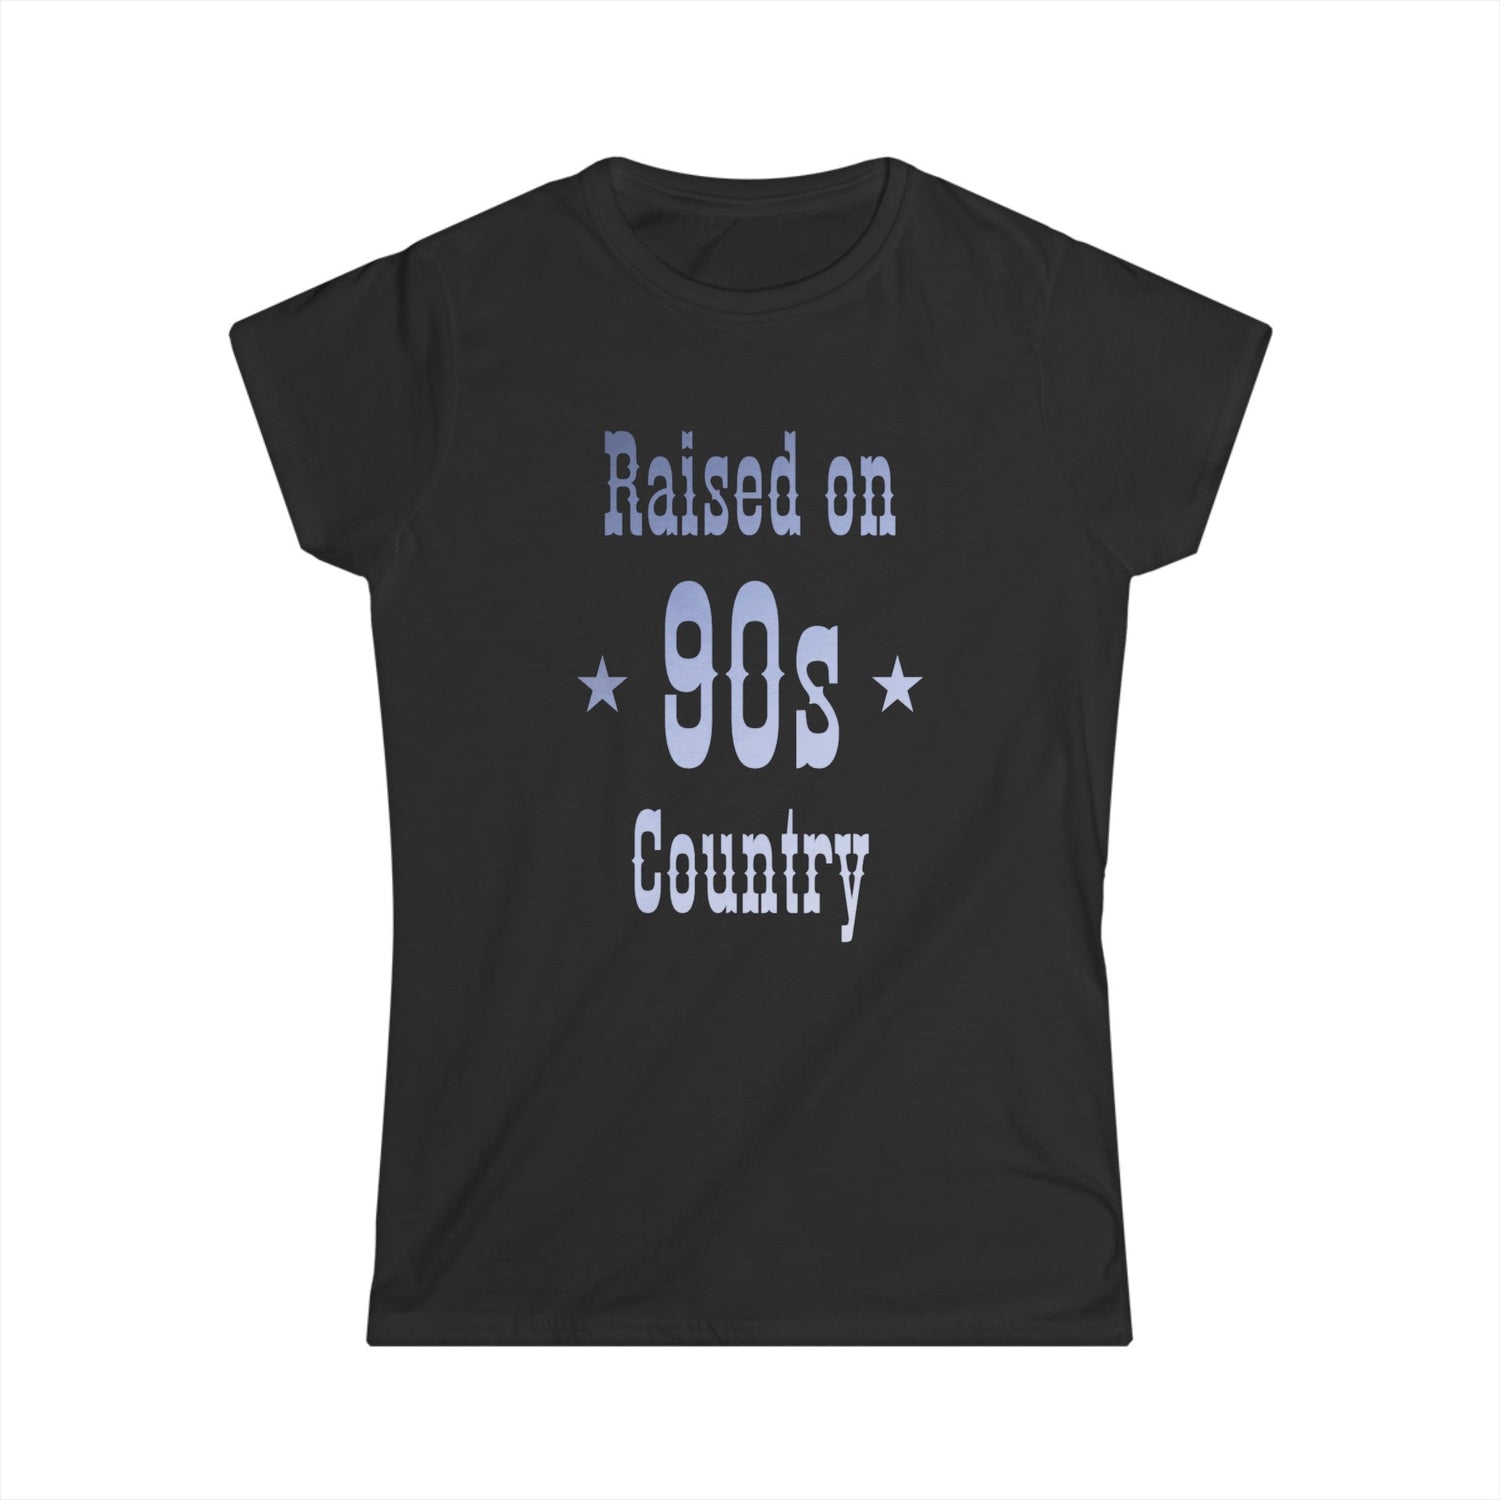 Raised on 90s Country - Women&